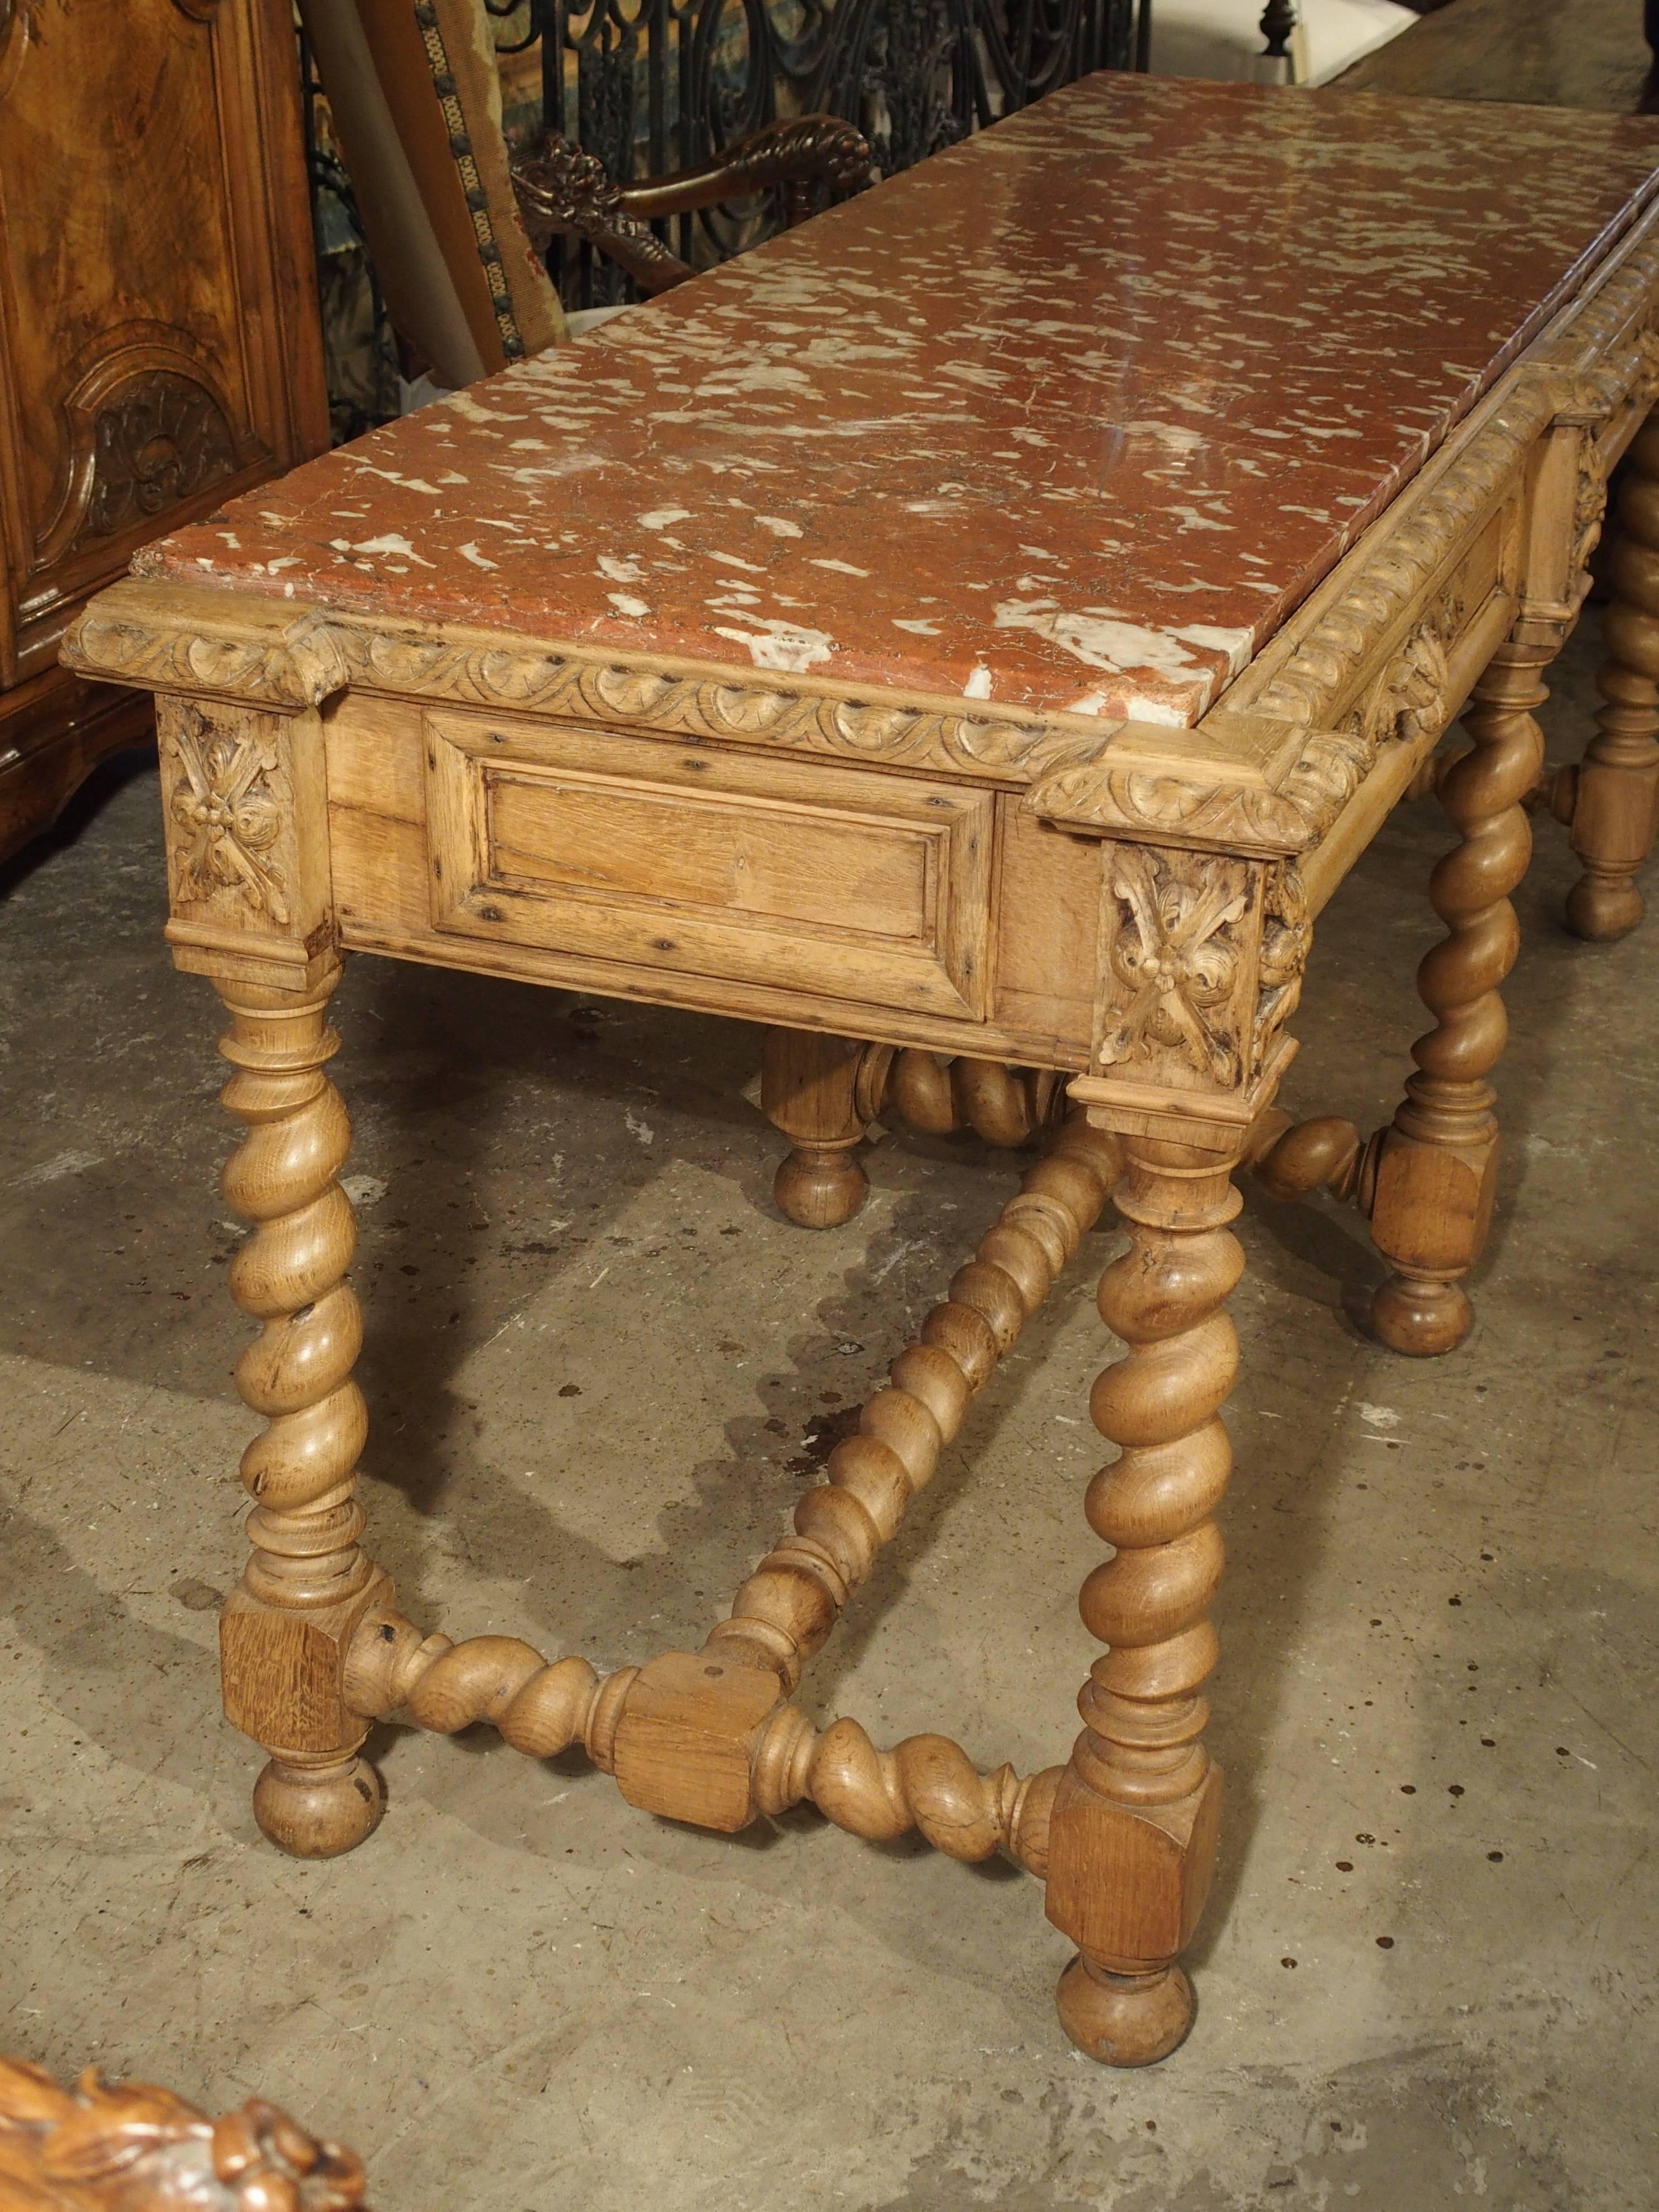 This antique French marble-topped console is in the Louis III style. The European oak has always been natural in its color with a light sealer on it. The rouge Languedoc marble top is inset and surrounded by moldings of gadrooned lunettes, which are